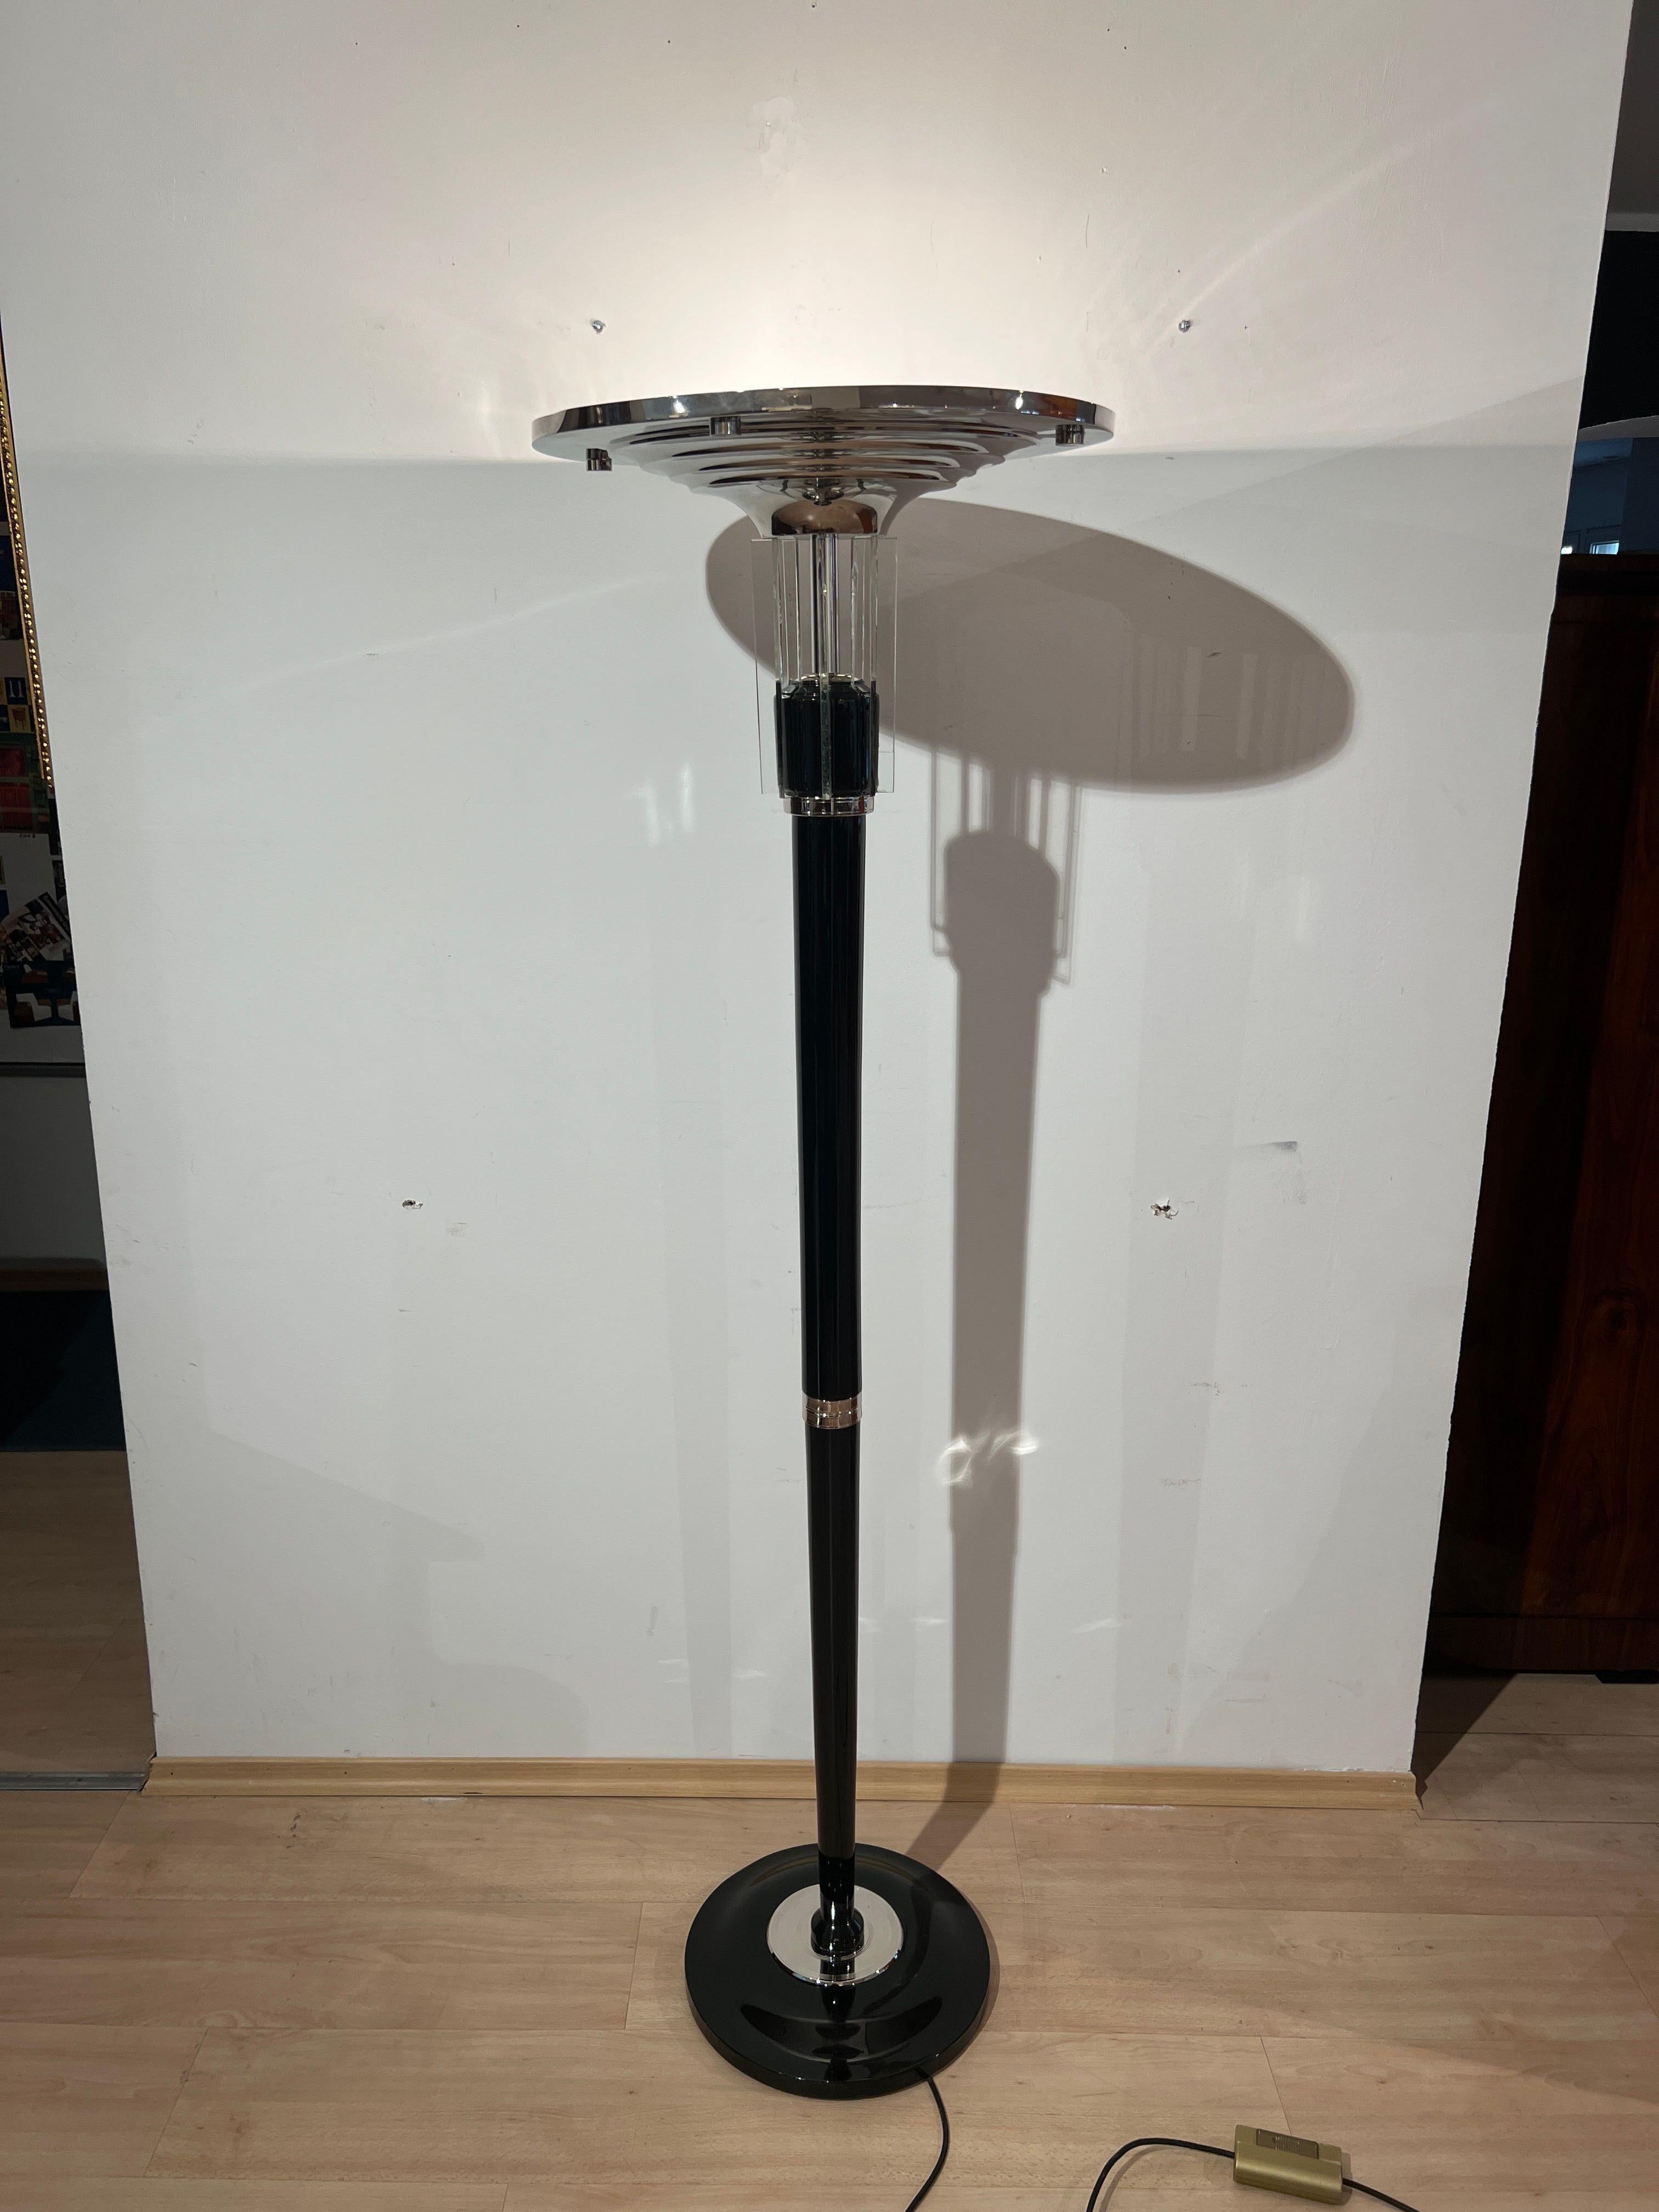 Art Deco floor lamp, black lacquer, nickel-plate and glass, France circa 1930

Round and tapered wooden stem, black lacquered and curved round base.

Multiple nickel plated brass parts. Stepped nickel plated metal shade with eight original glass